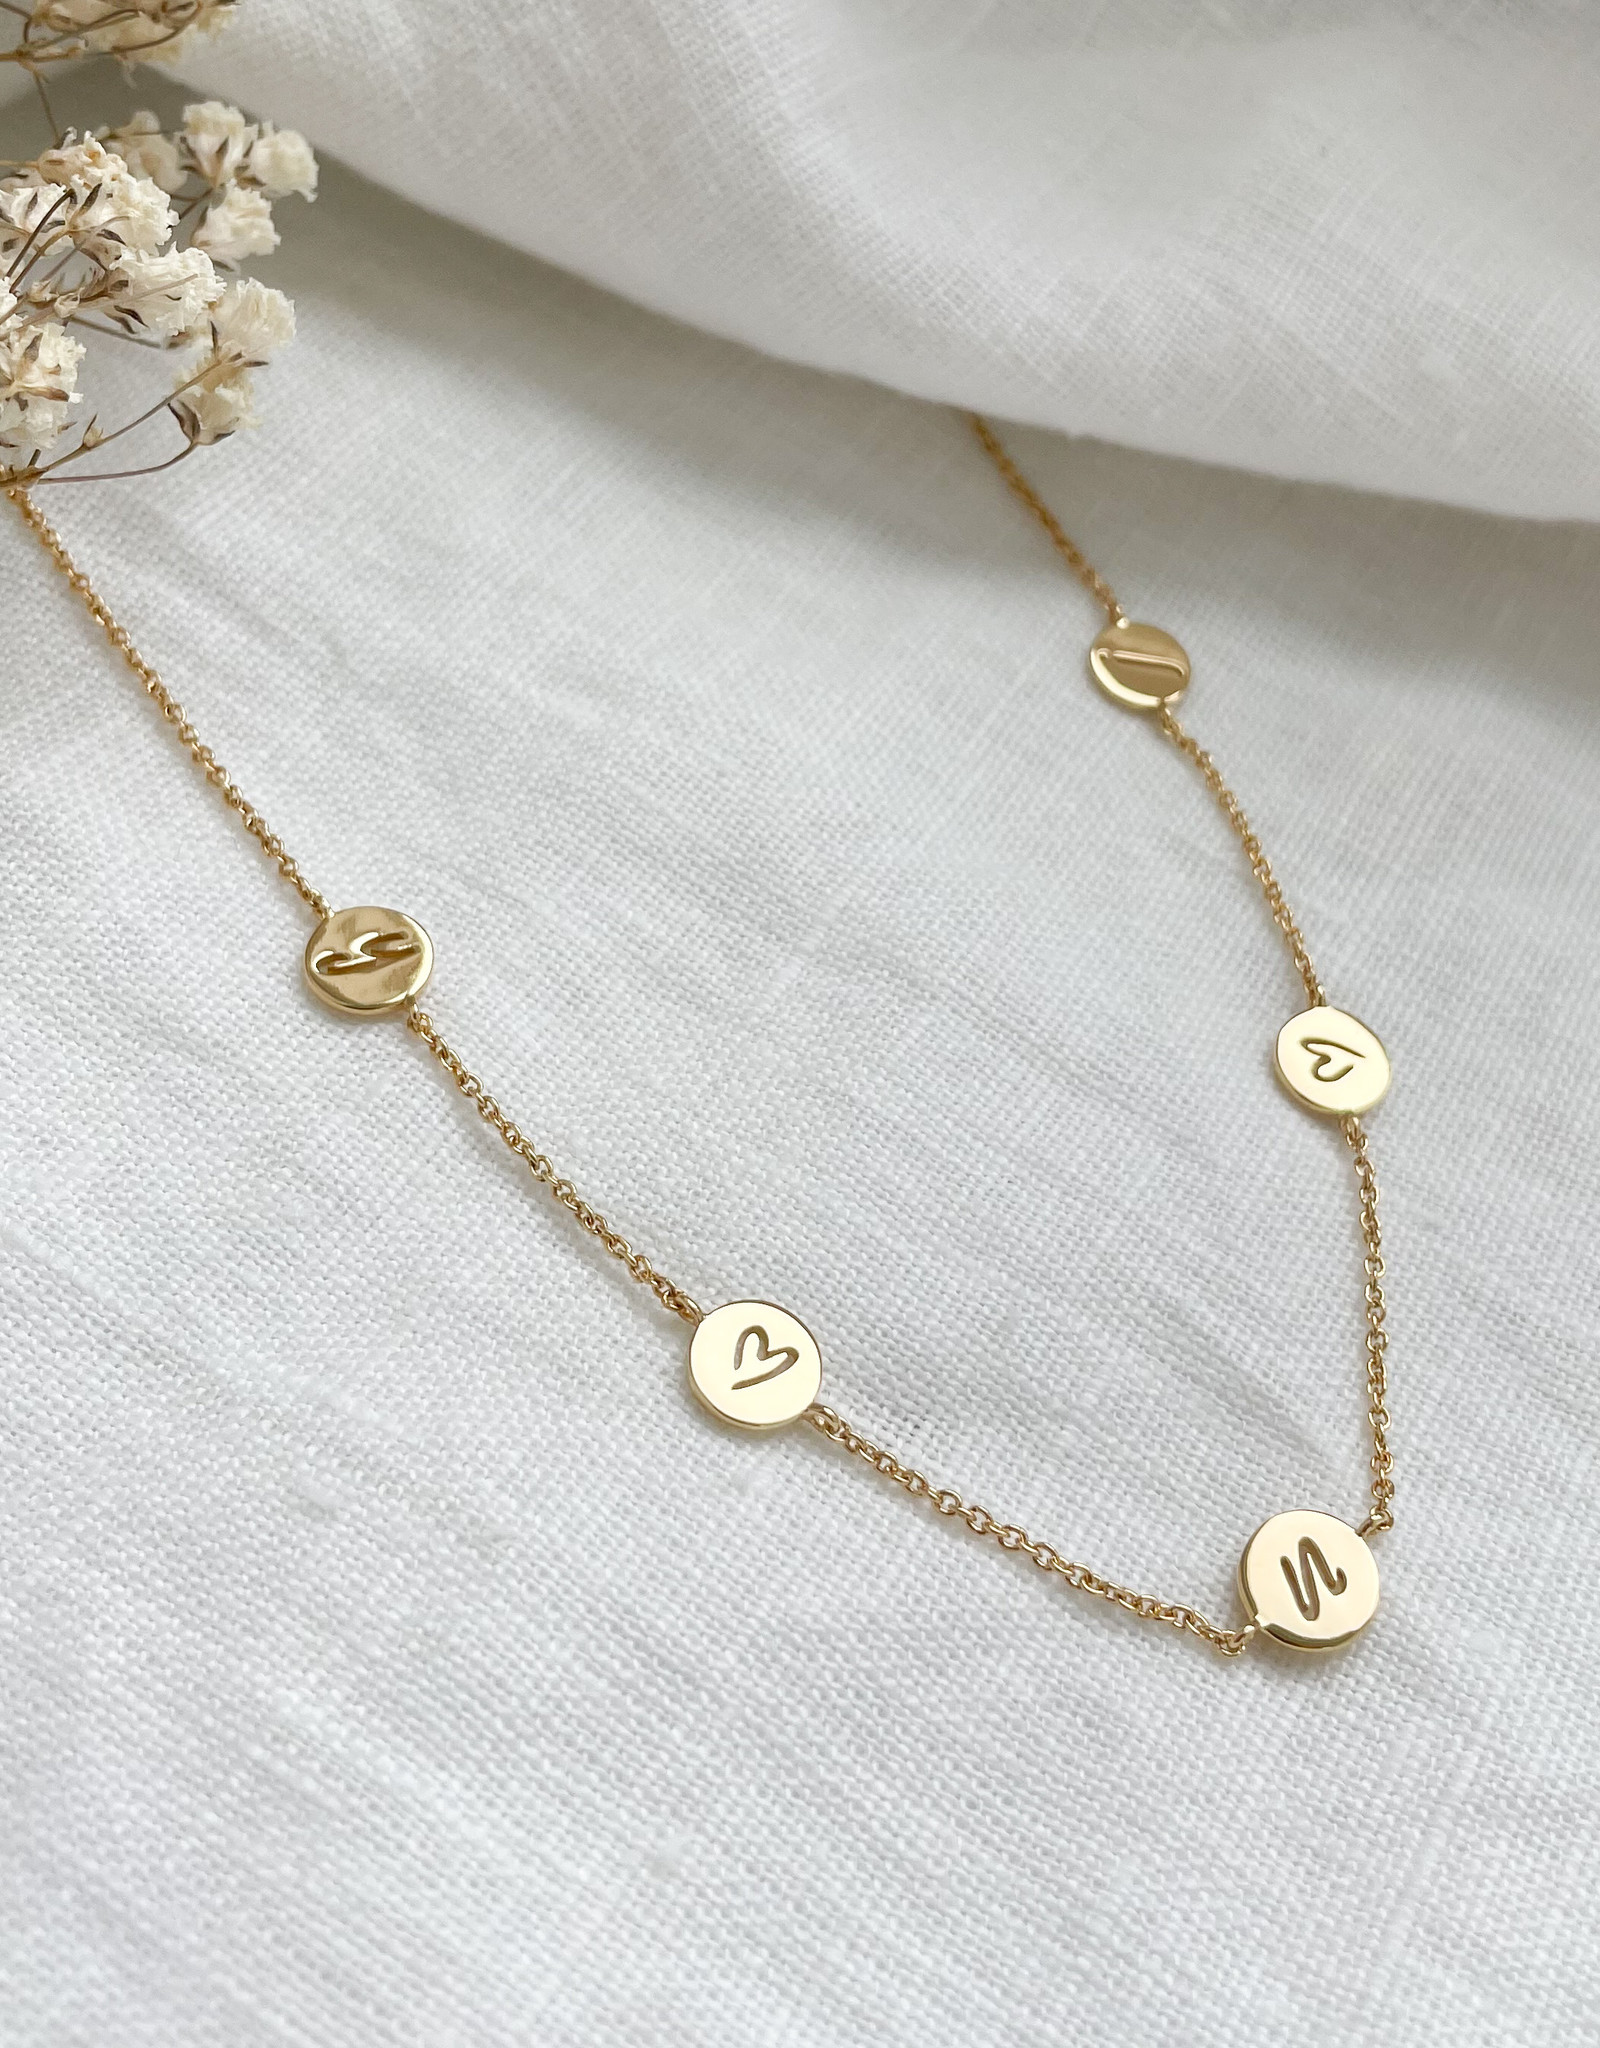 Design your necklace with 5 charms